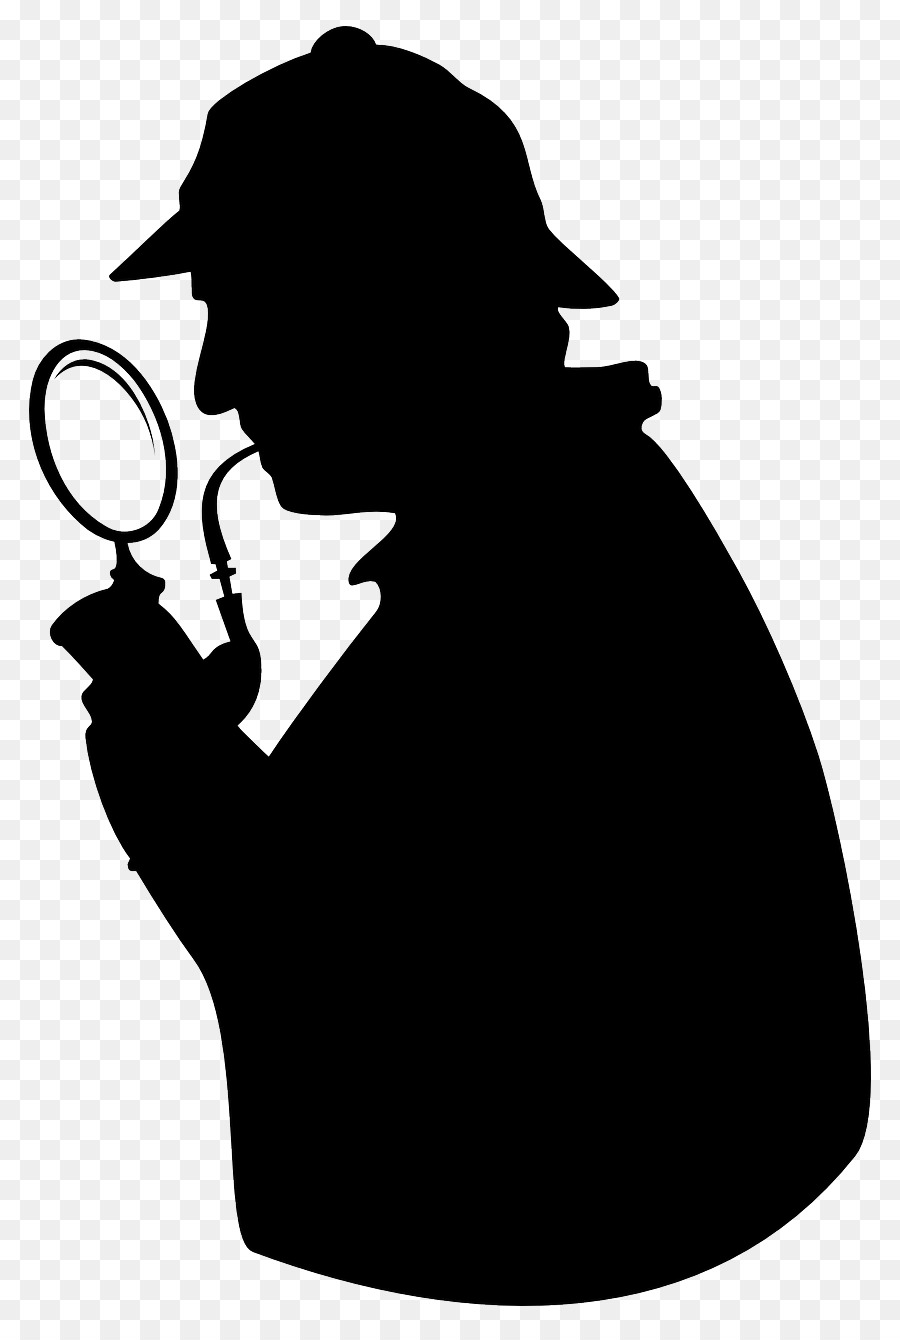 Sherlock Holmes YouTube Mystery Amazon.com Crime Fiction - detective png download - 900*1332 - Free Transparent Sherlock Holmes png Download.